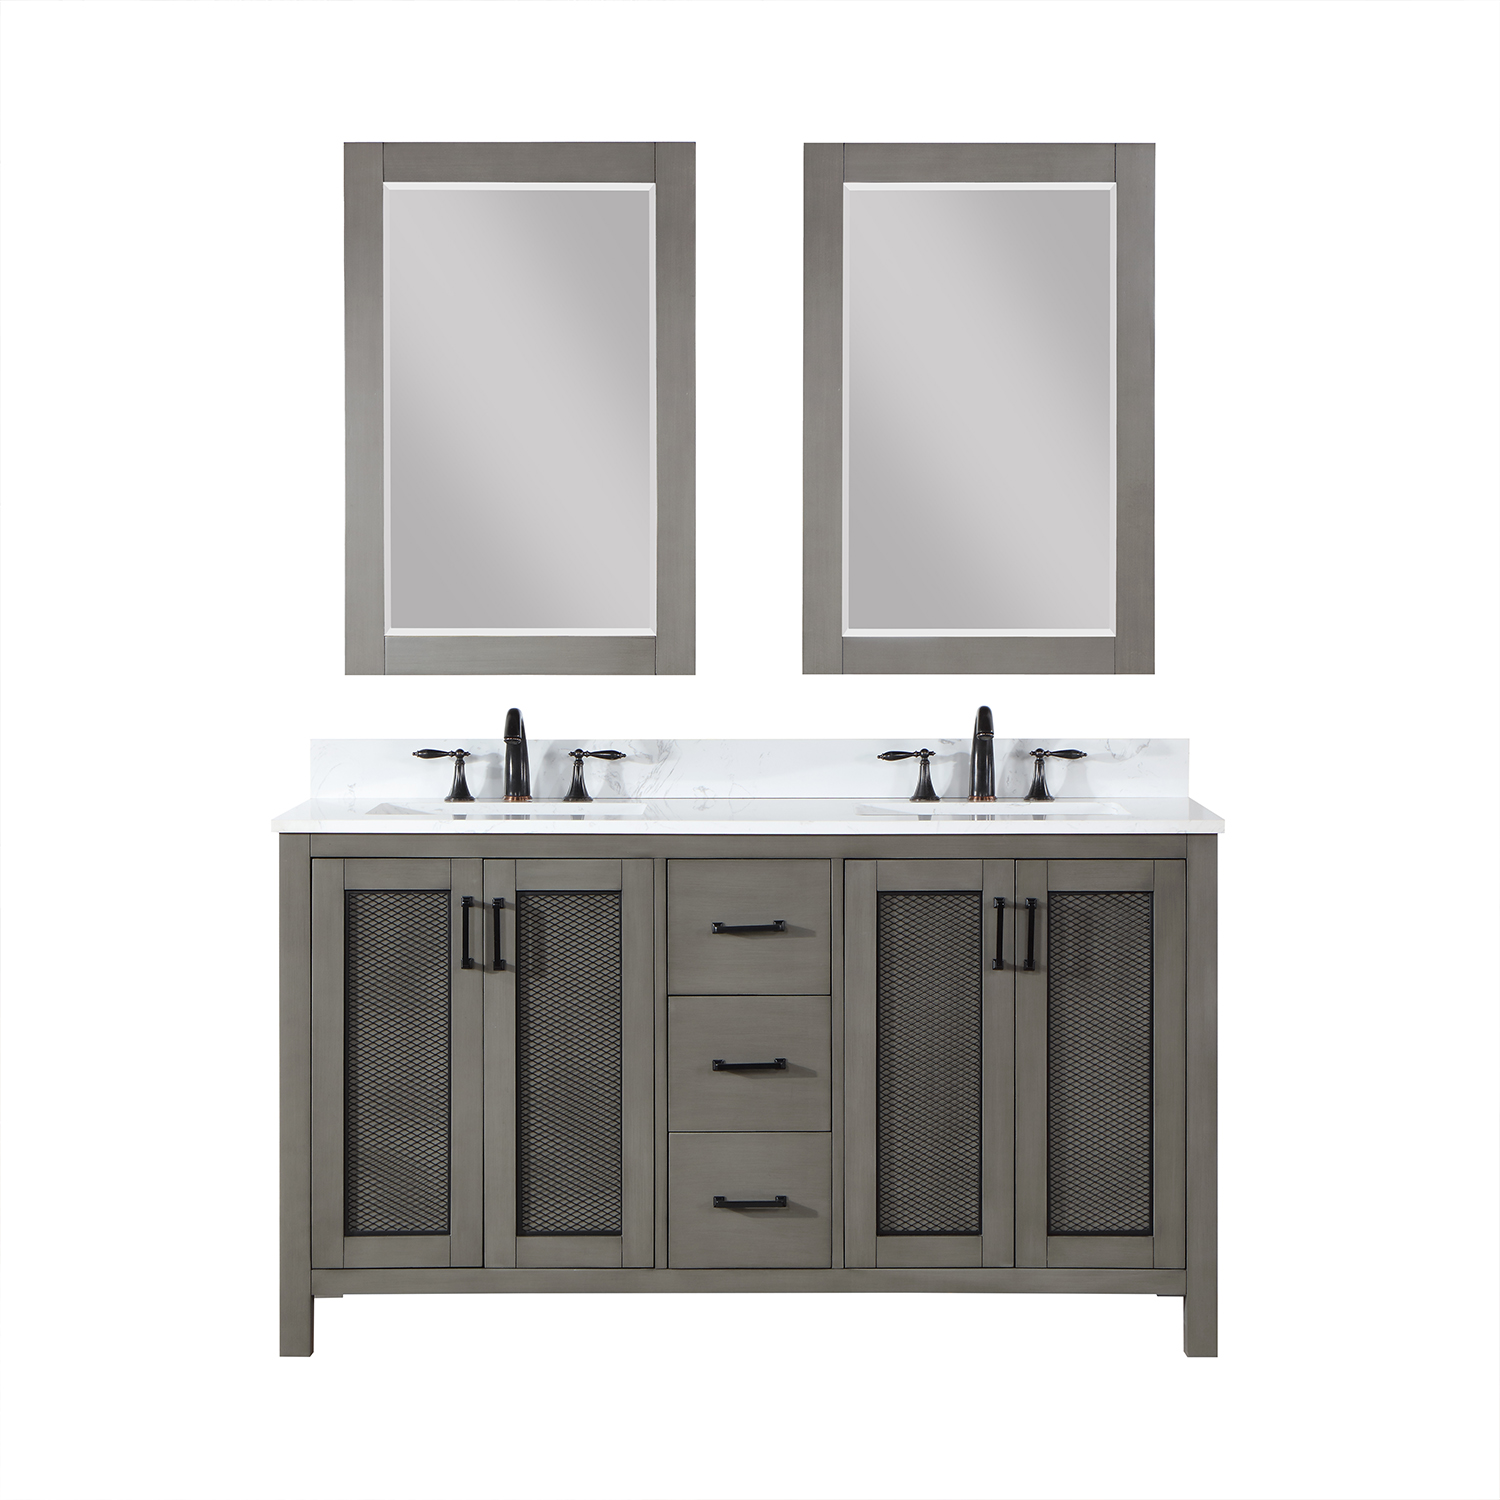 Issac Edwards Collection 60" Double Bathroom Vanity Set in Gray Pine with Carrara White Composite Stone Countertop without Mirror 